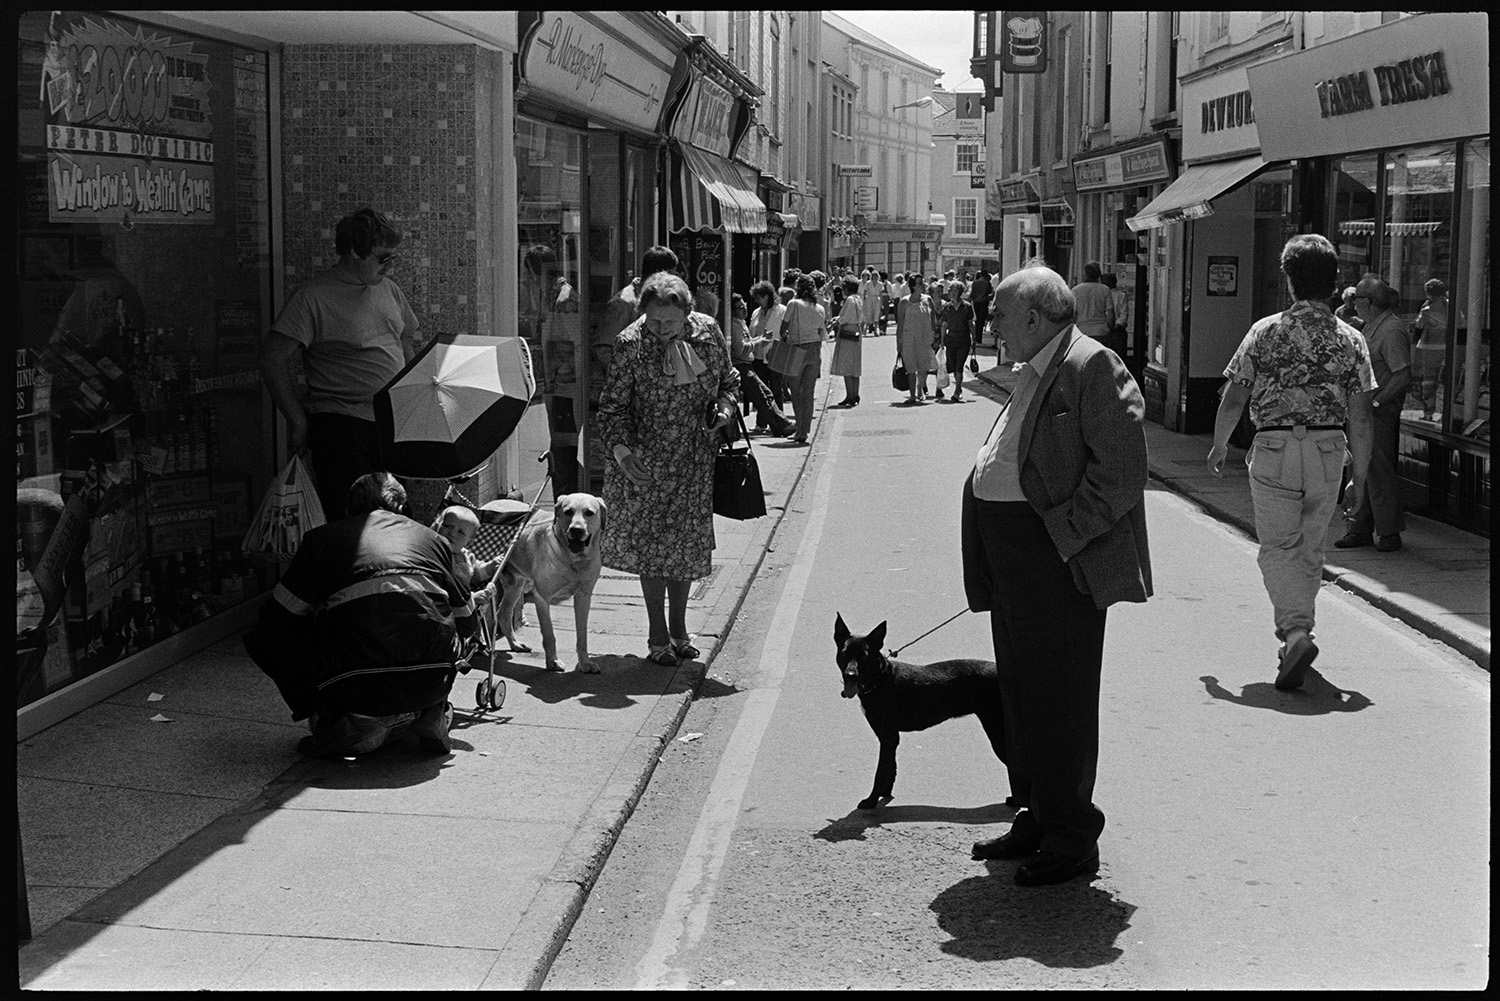 Street scenes with shoppers and passers by. 
[Men and women shopping in Bideford High Street. Two people are walking dogs and another person is checking on a child in a pushchair. Shop fronts are visible, including Farm Fresh and R Mackenzie Dye.]